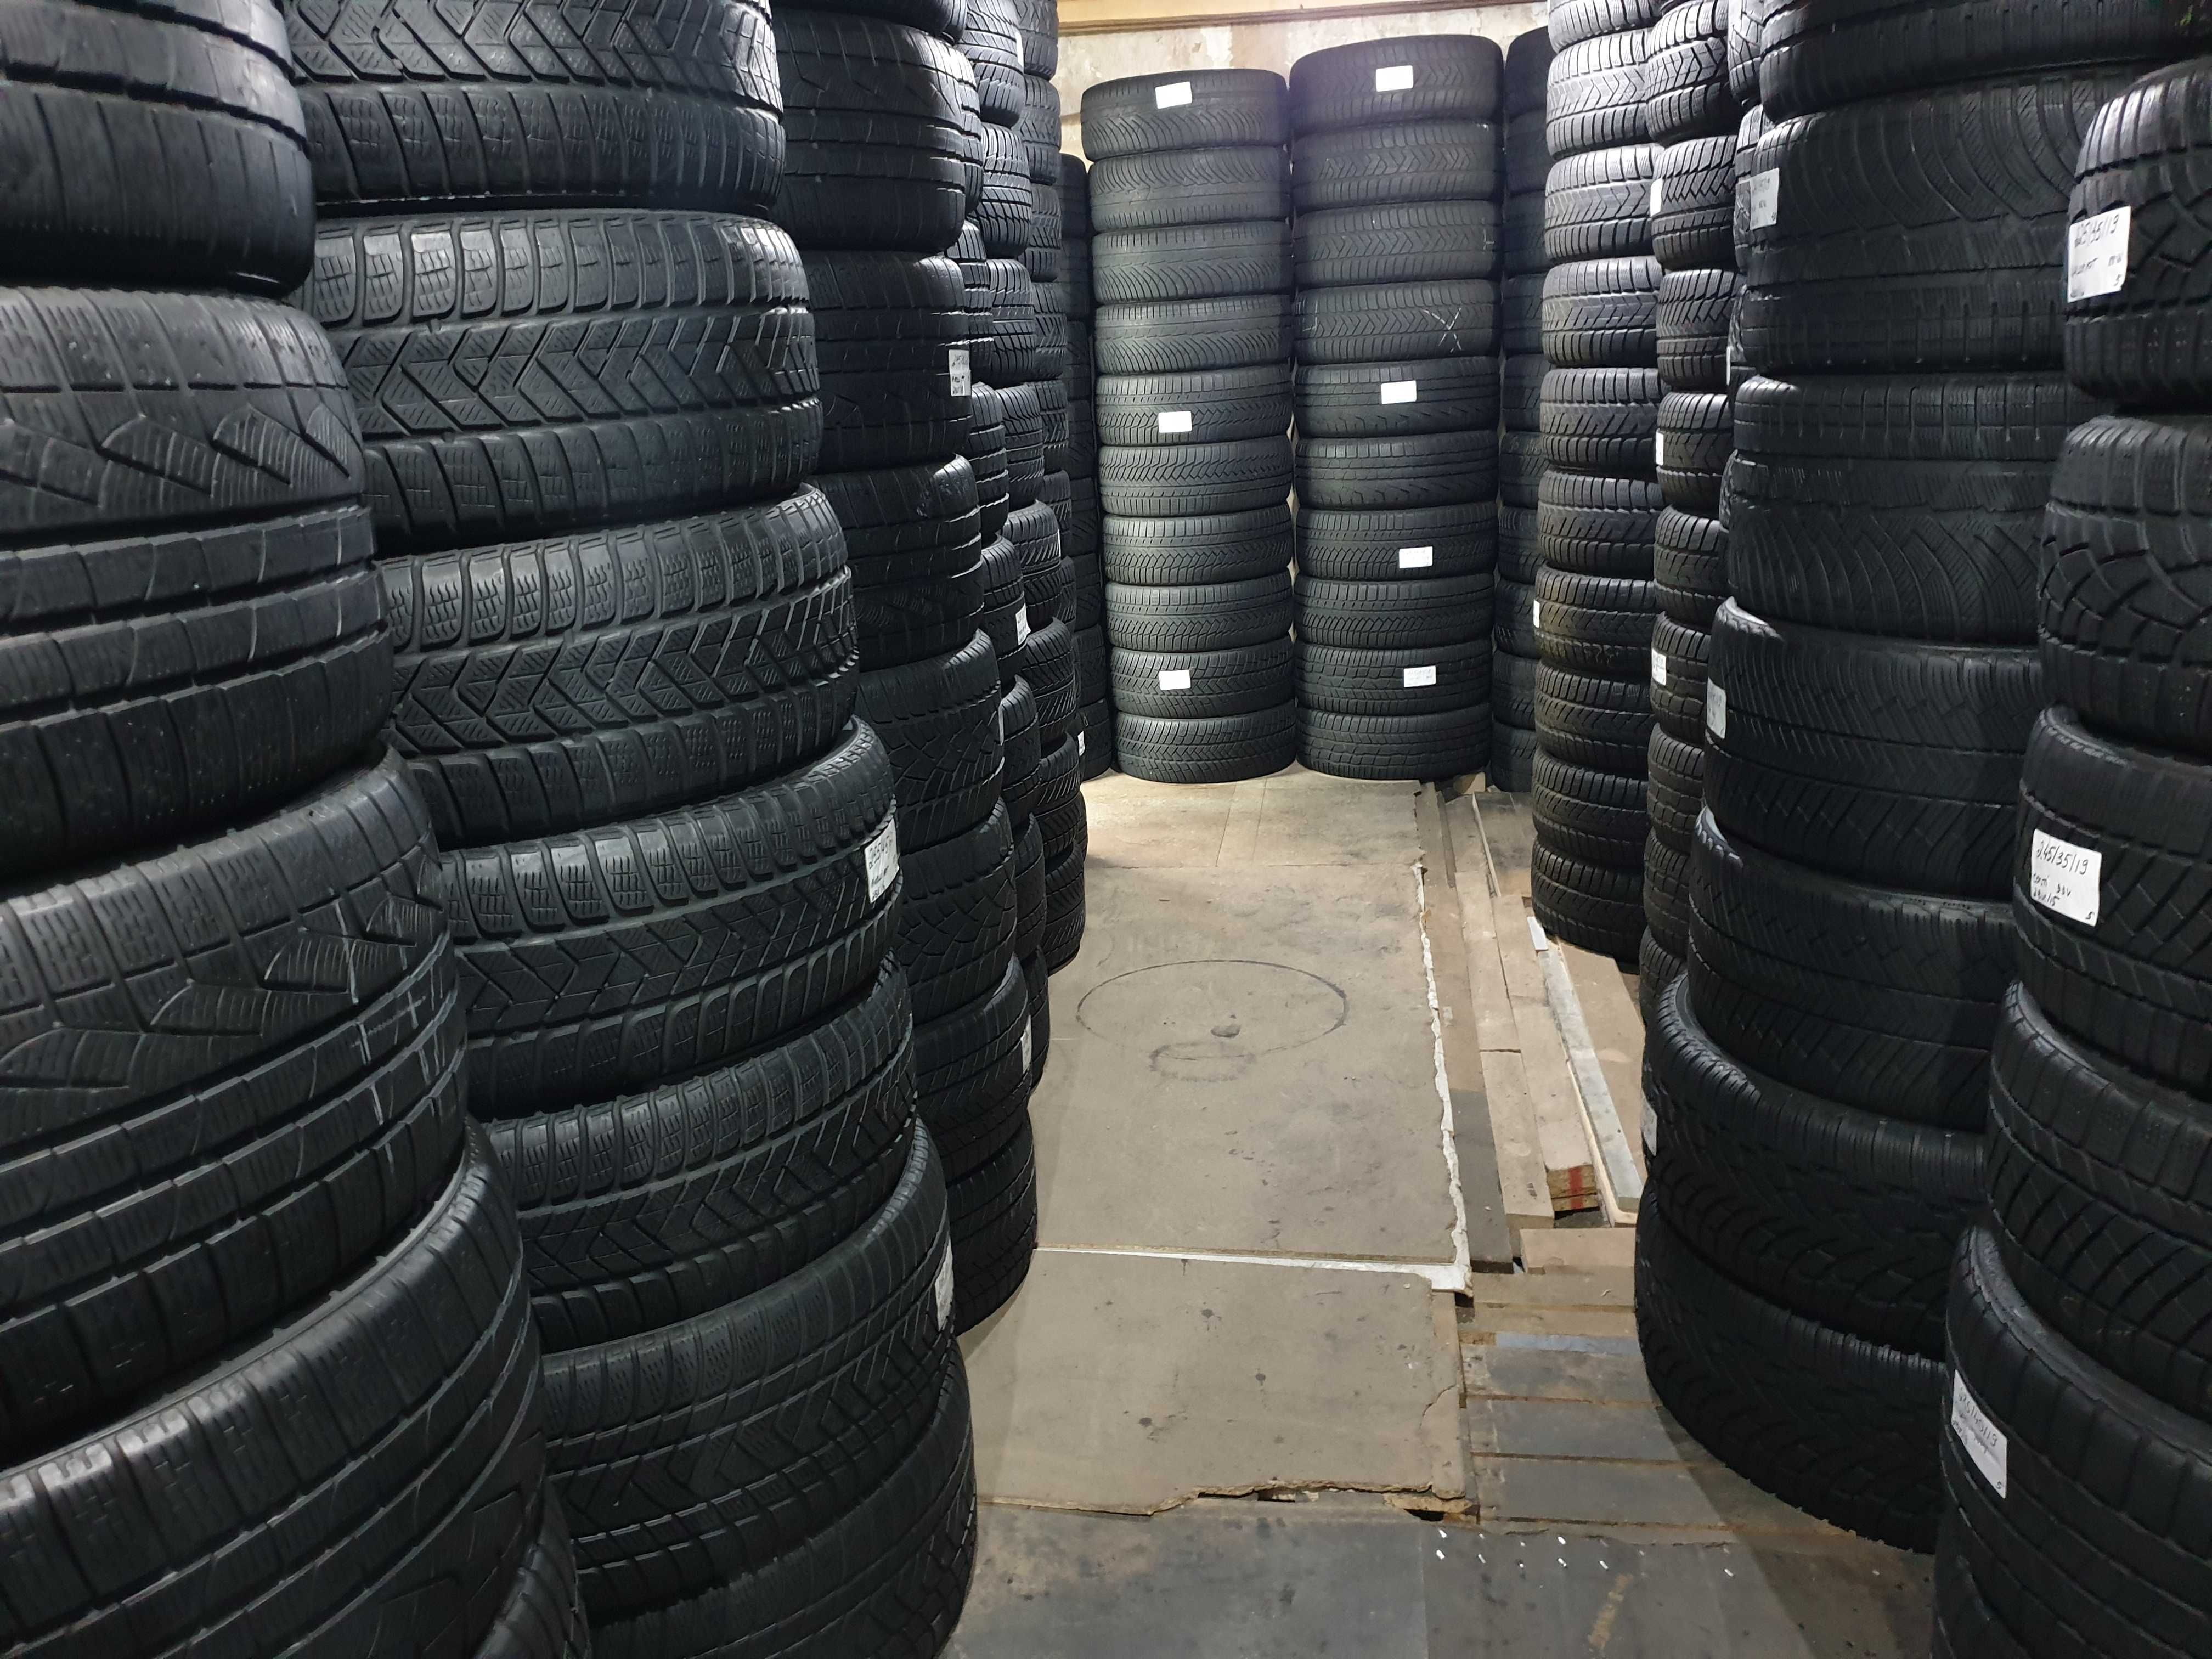 Anvelope Second Hand Goodyear Vara-255/40 R18 95V,in stoc R17/19/20